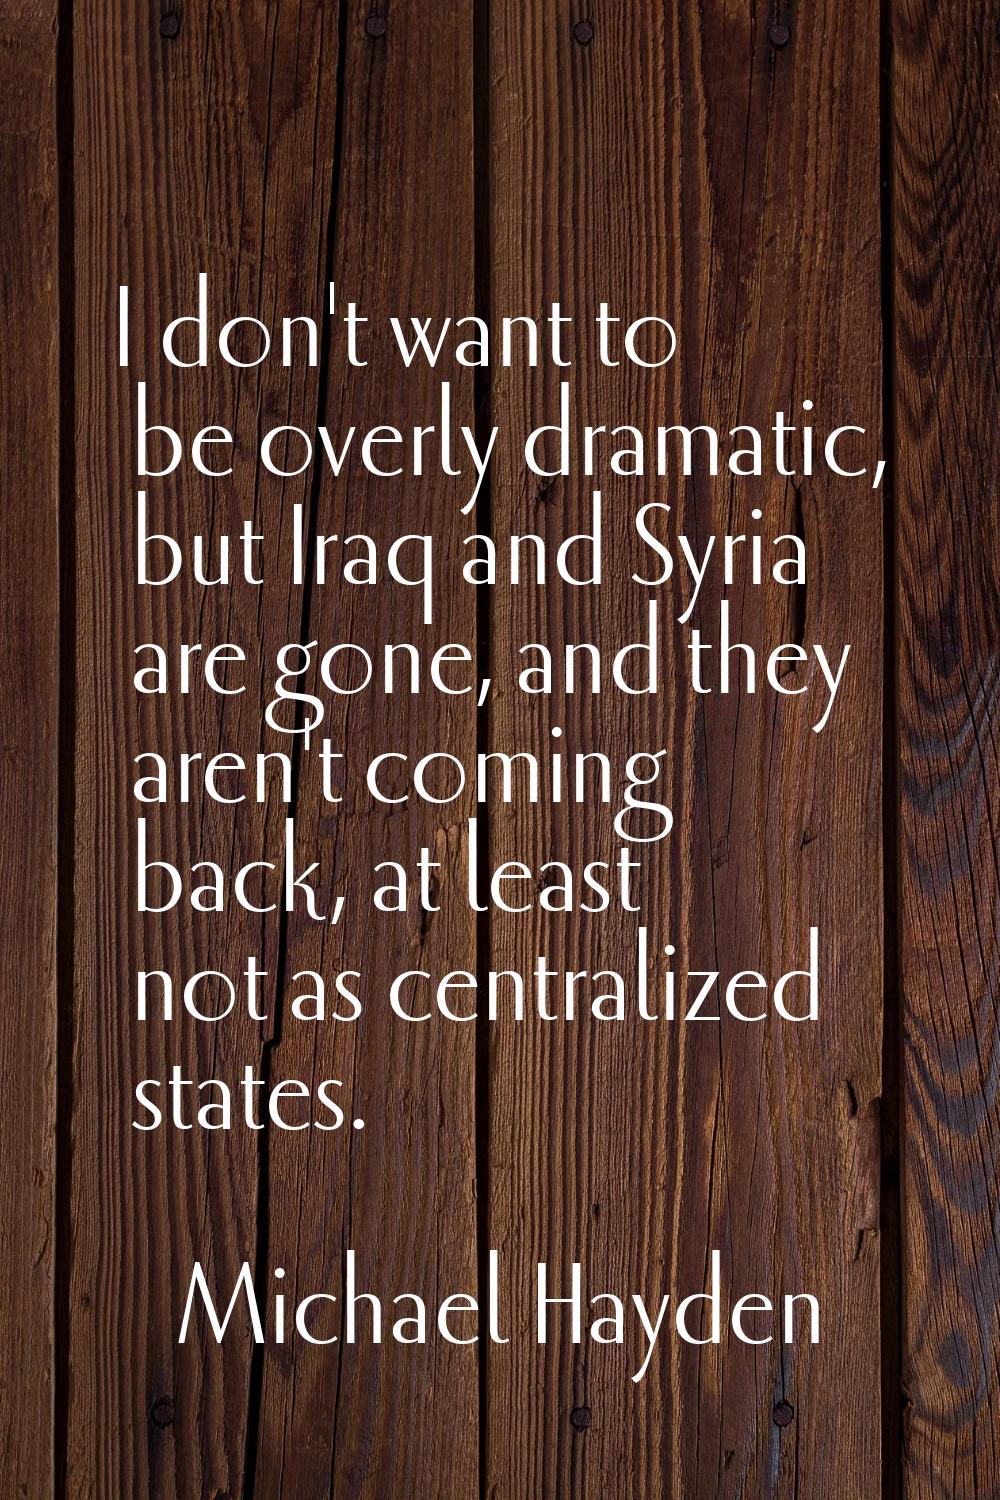 I don't want to be overly dramatic, but Iraq and Syria are gone, and they aren't coming back, at le